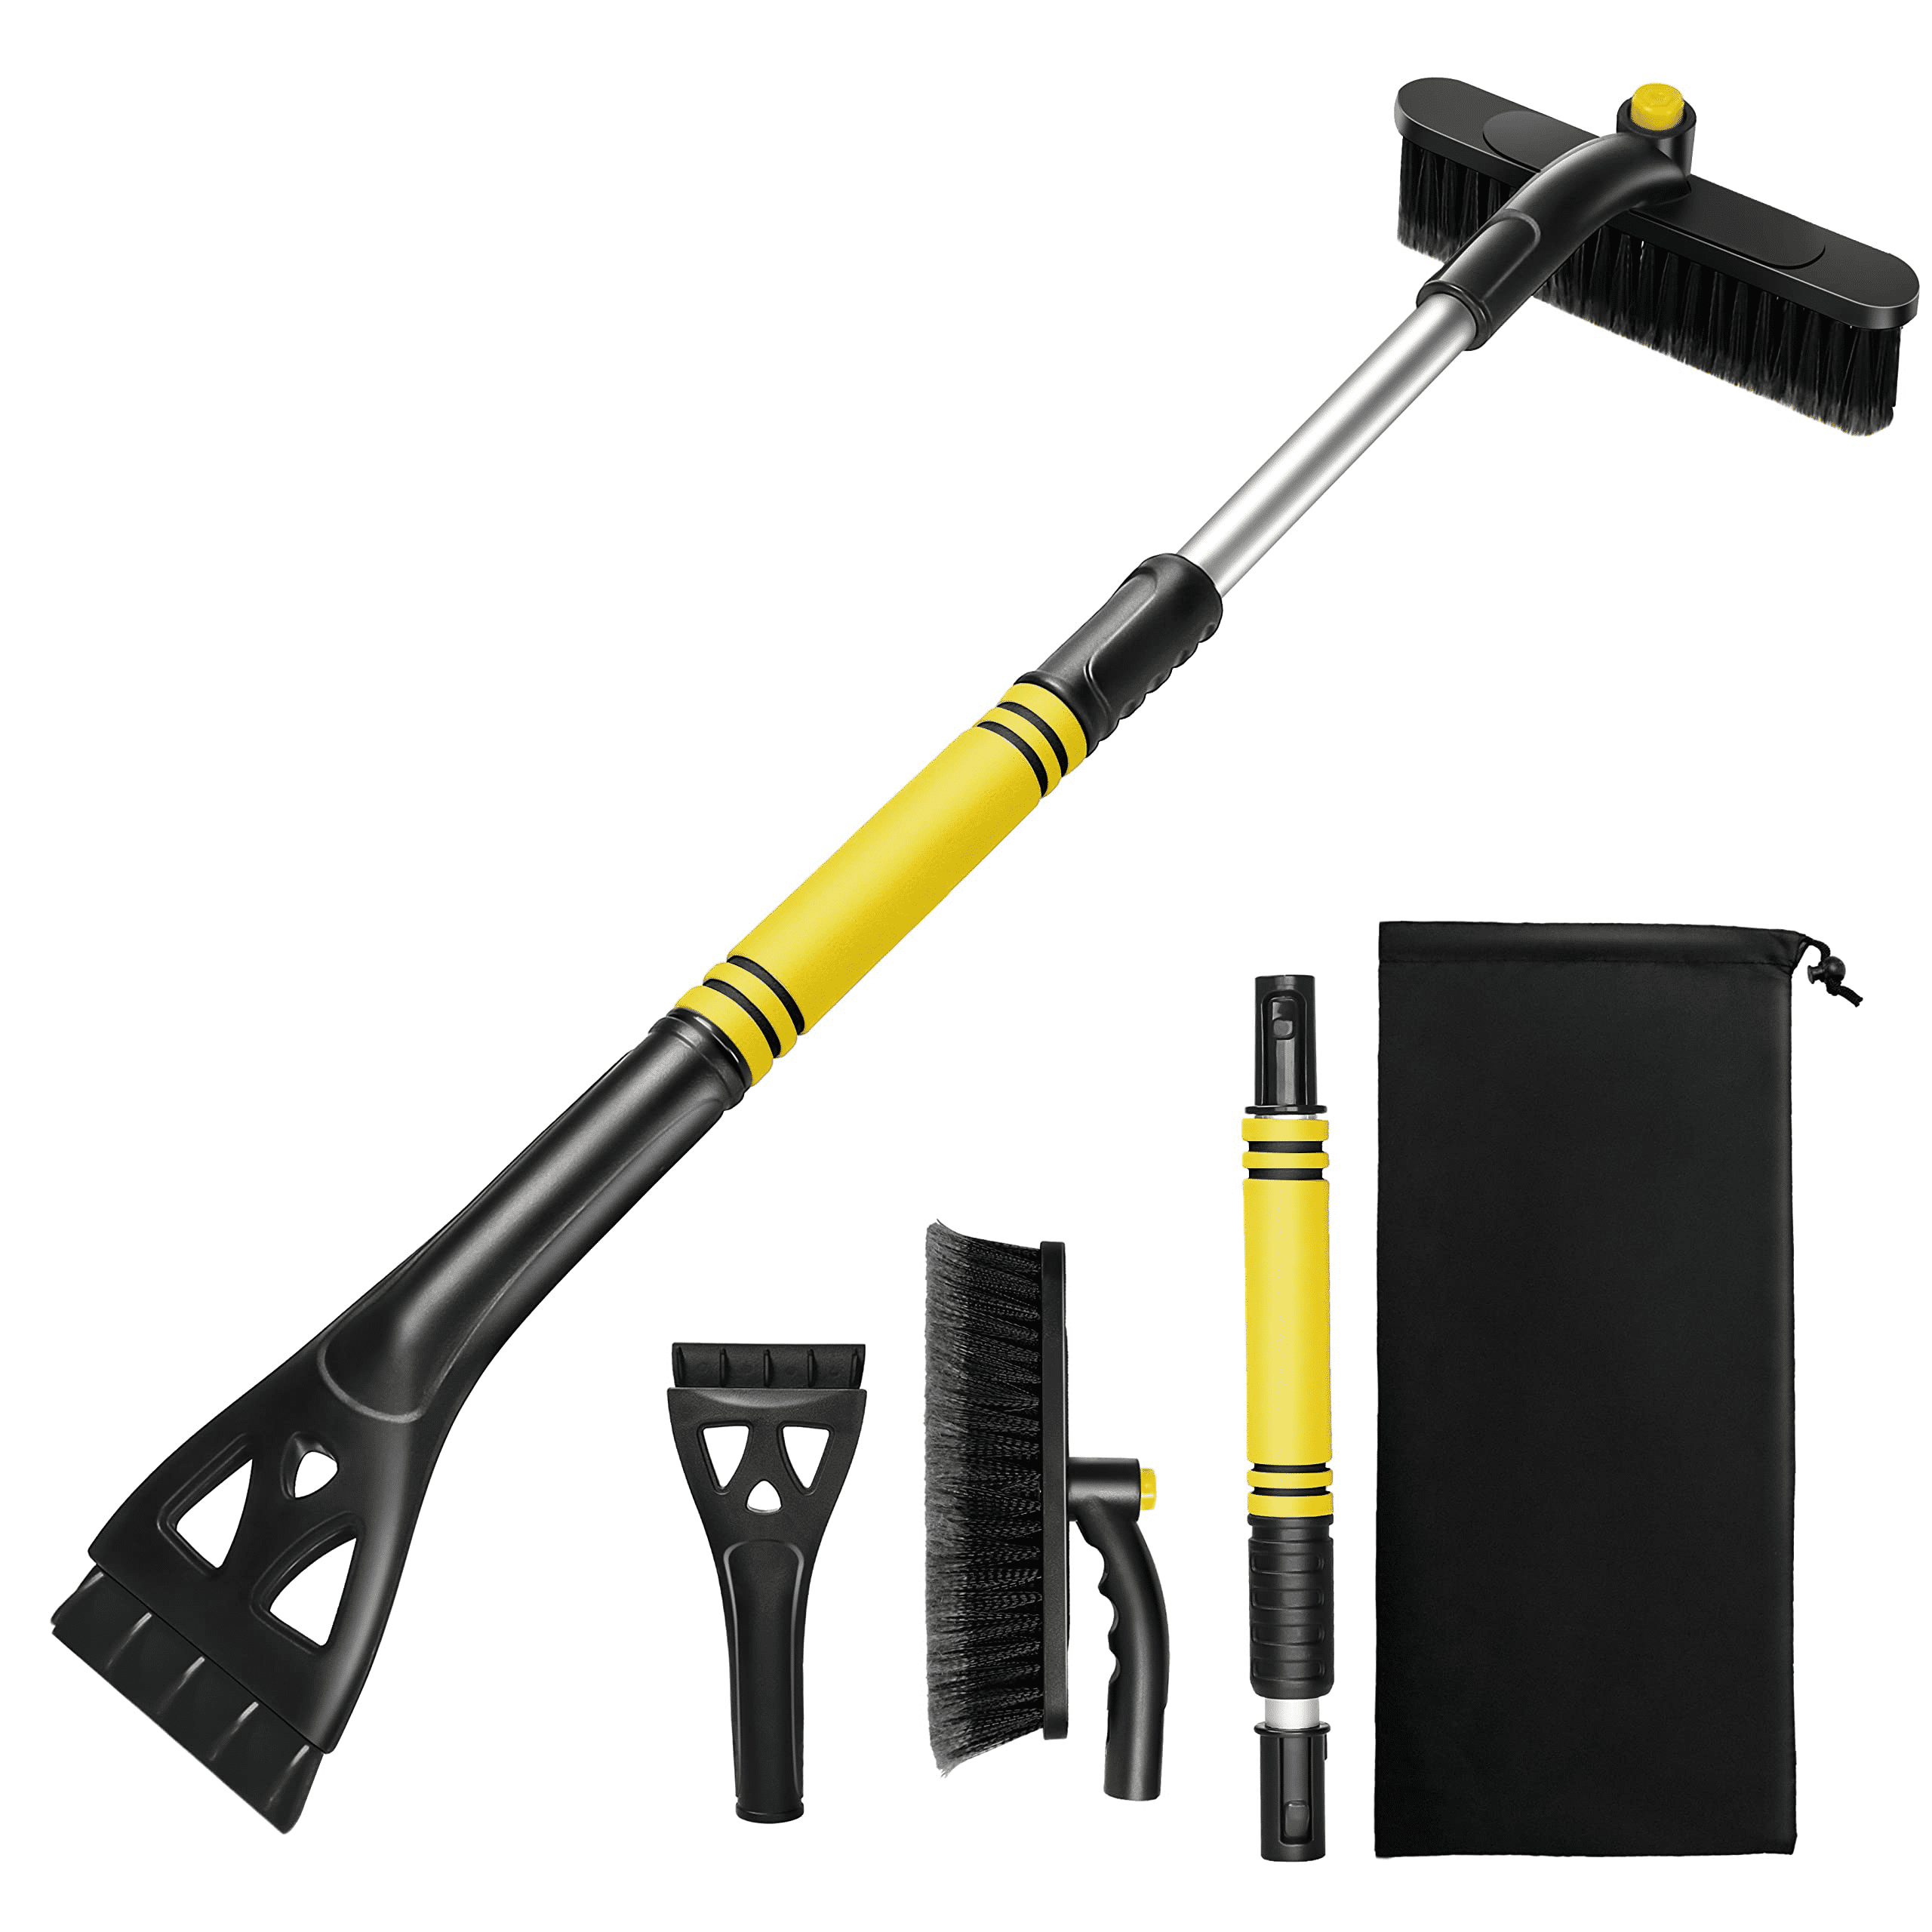  EcoNour 44.7 3 in 1 Snow Brush for SUV, 360° Pivoting  Extendable Long Snow Brush for Car, Snow and Ice Scrapers for Windshield  with Ergonomic Foam Grip for Car Truck SUV